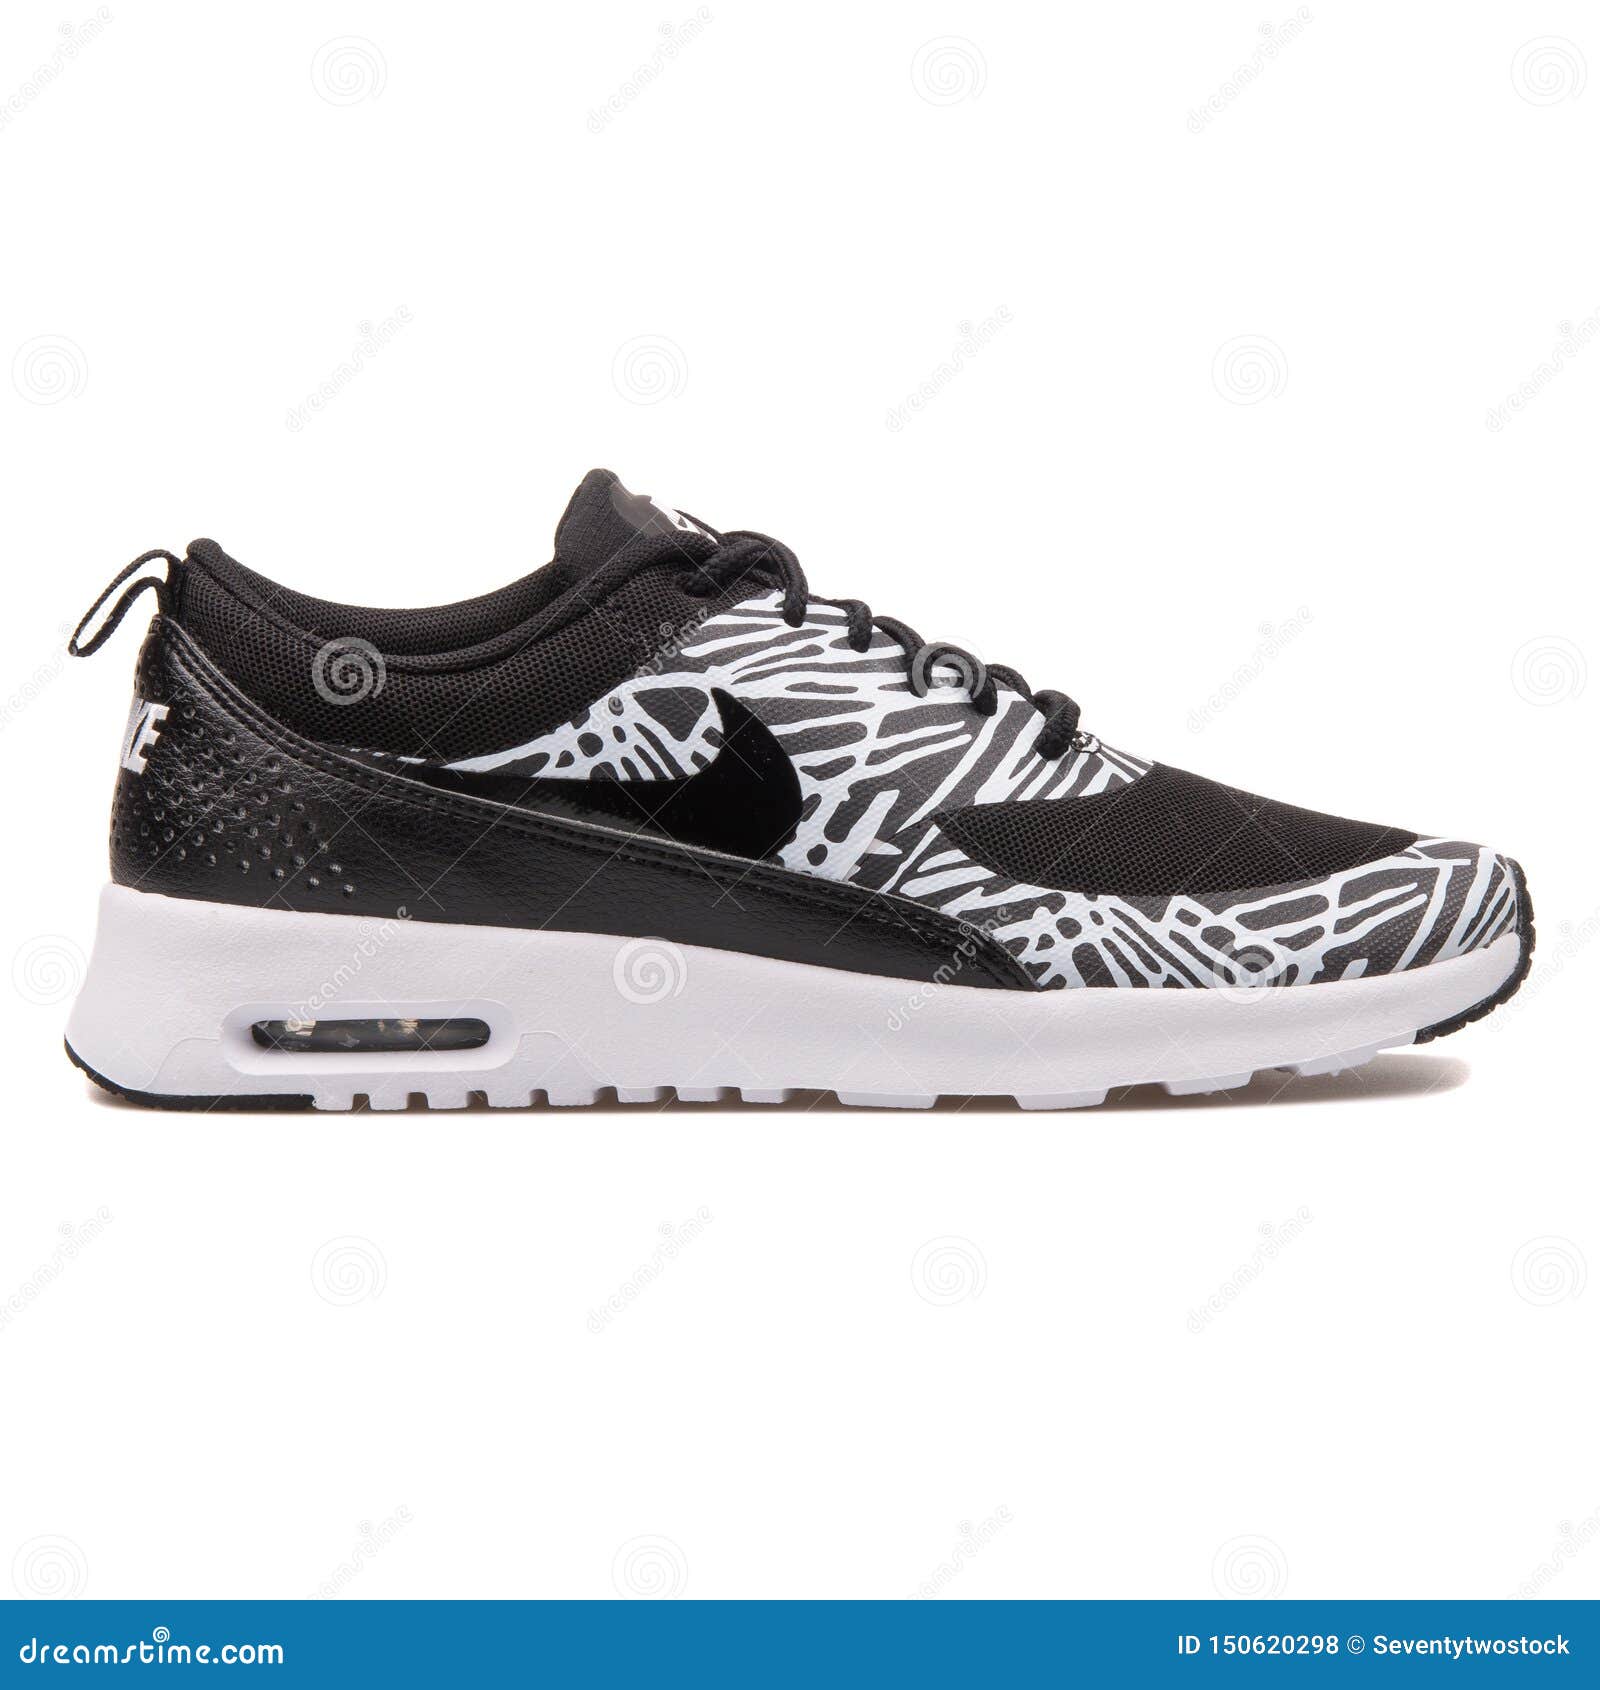 Nike Max Thea Print Black and White Sneaker Editorial Stock Photo - Image of sneakers, equipment: 150620298